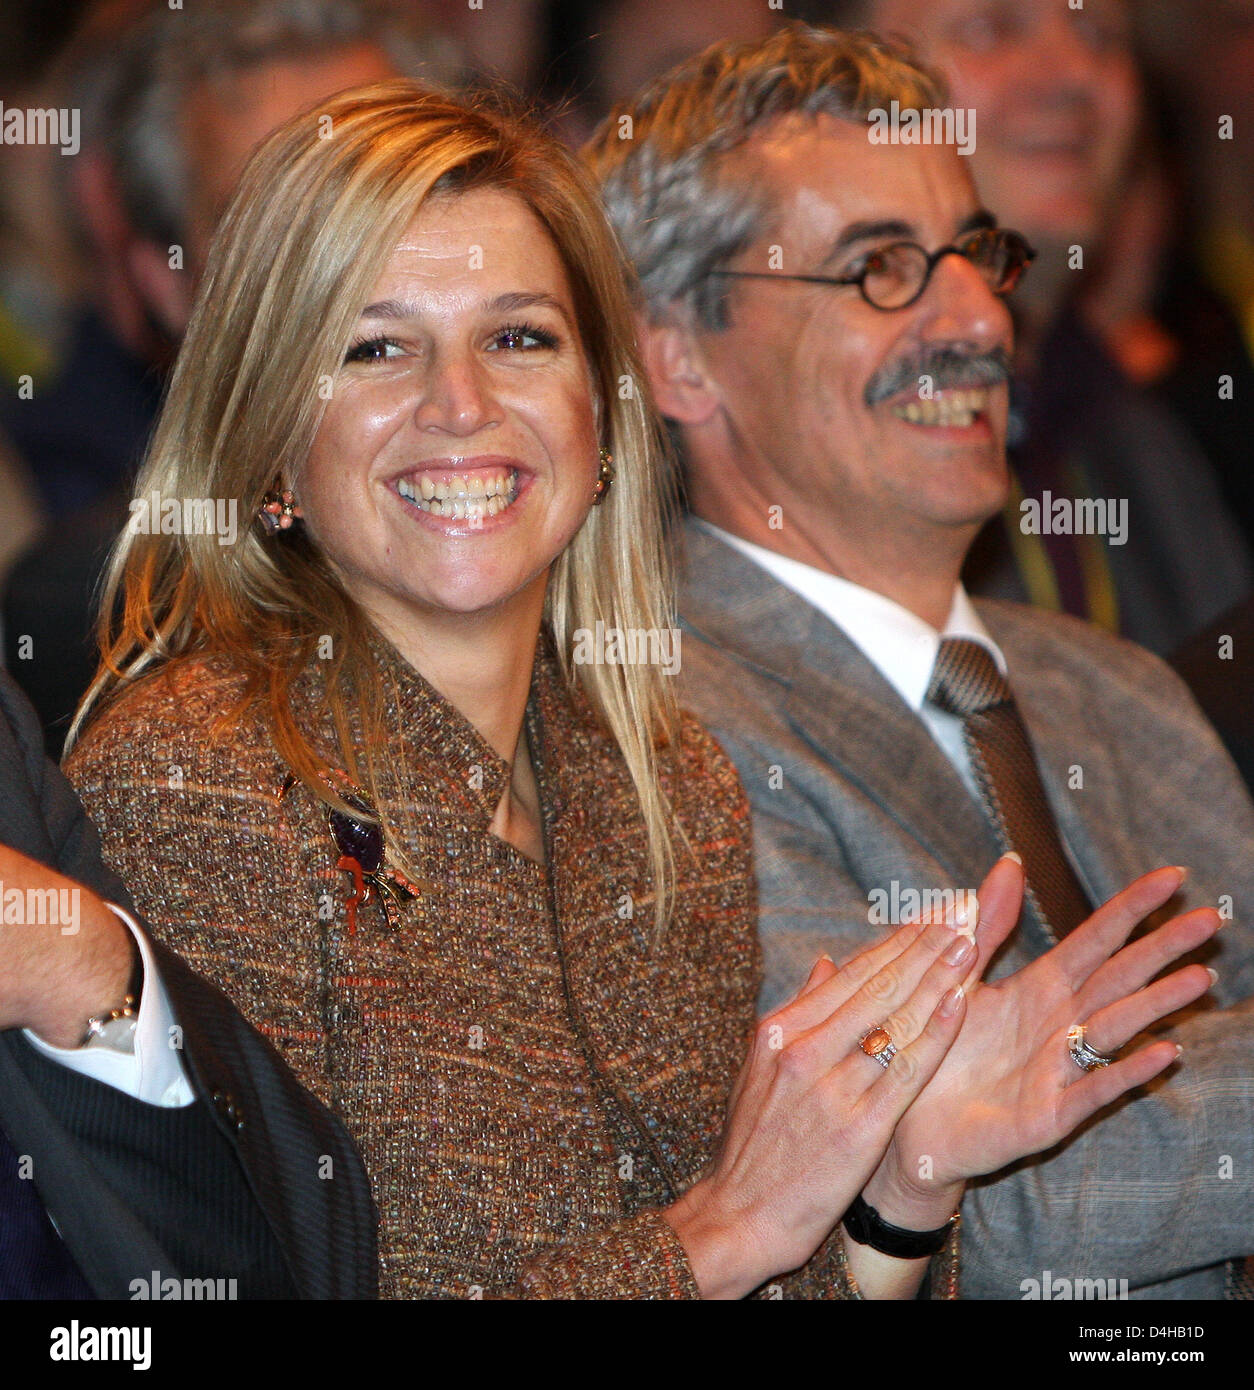 Dutch Princess Maxima attends the first national event of the Neighbourhood Alliance in the Van Nelle Factory in Rotterdam, The Netherlands, 20 November 2008. In the meeting, social neighbourhood structures in cities, villages and rural areas were discussed. Photo: Albert Philip van der Werf (NETHERLANDS OUT) Stock Photo